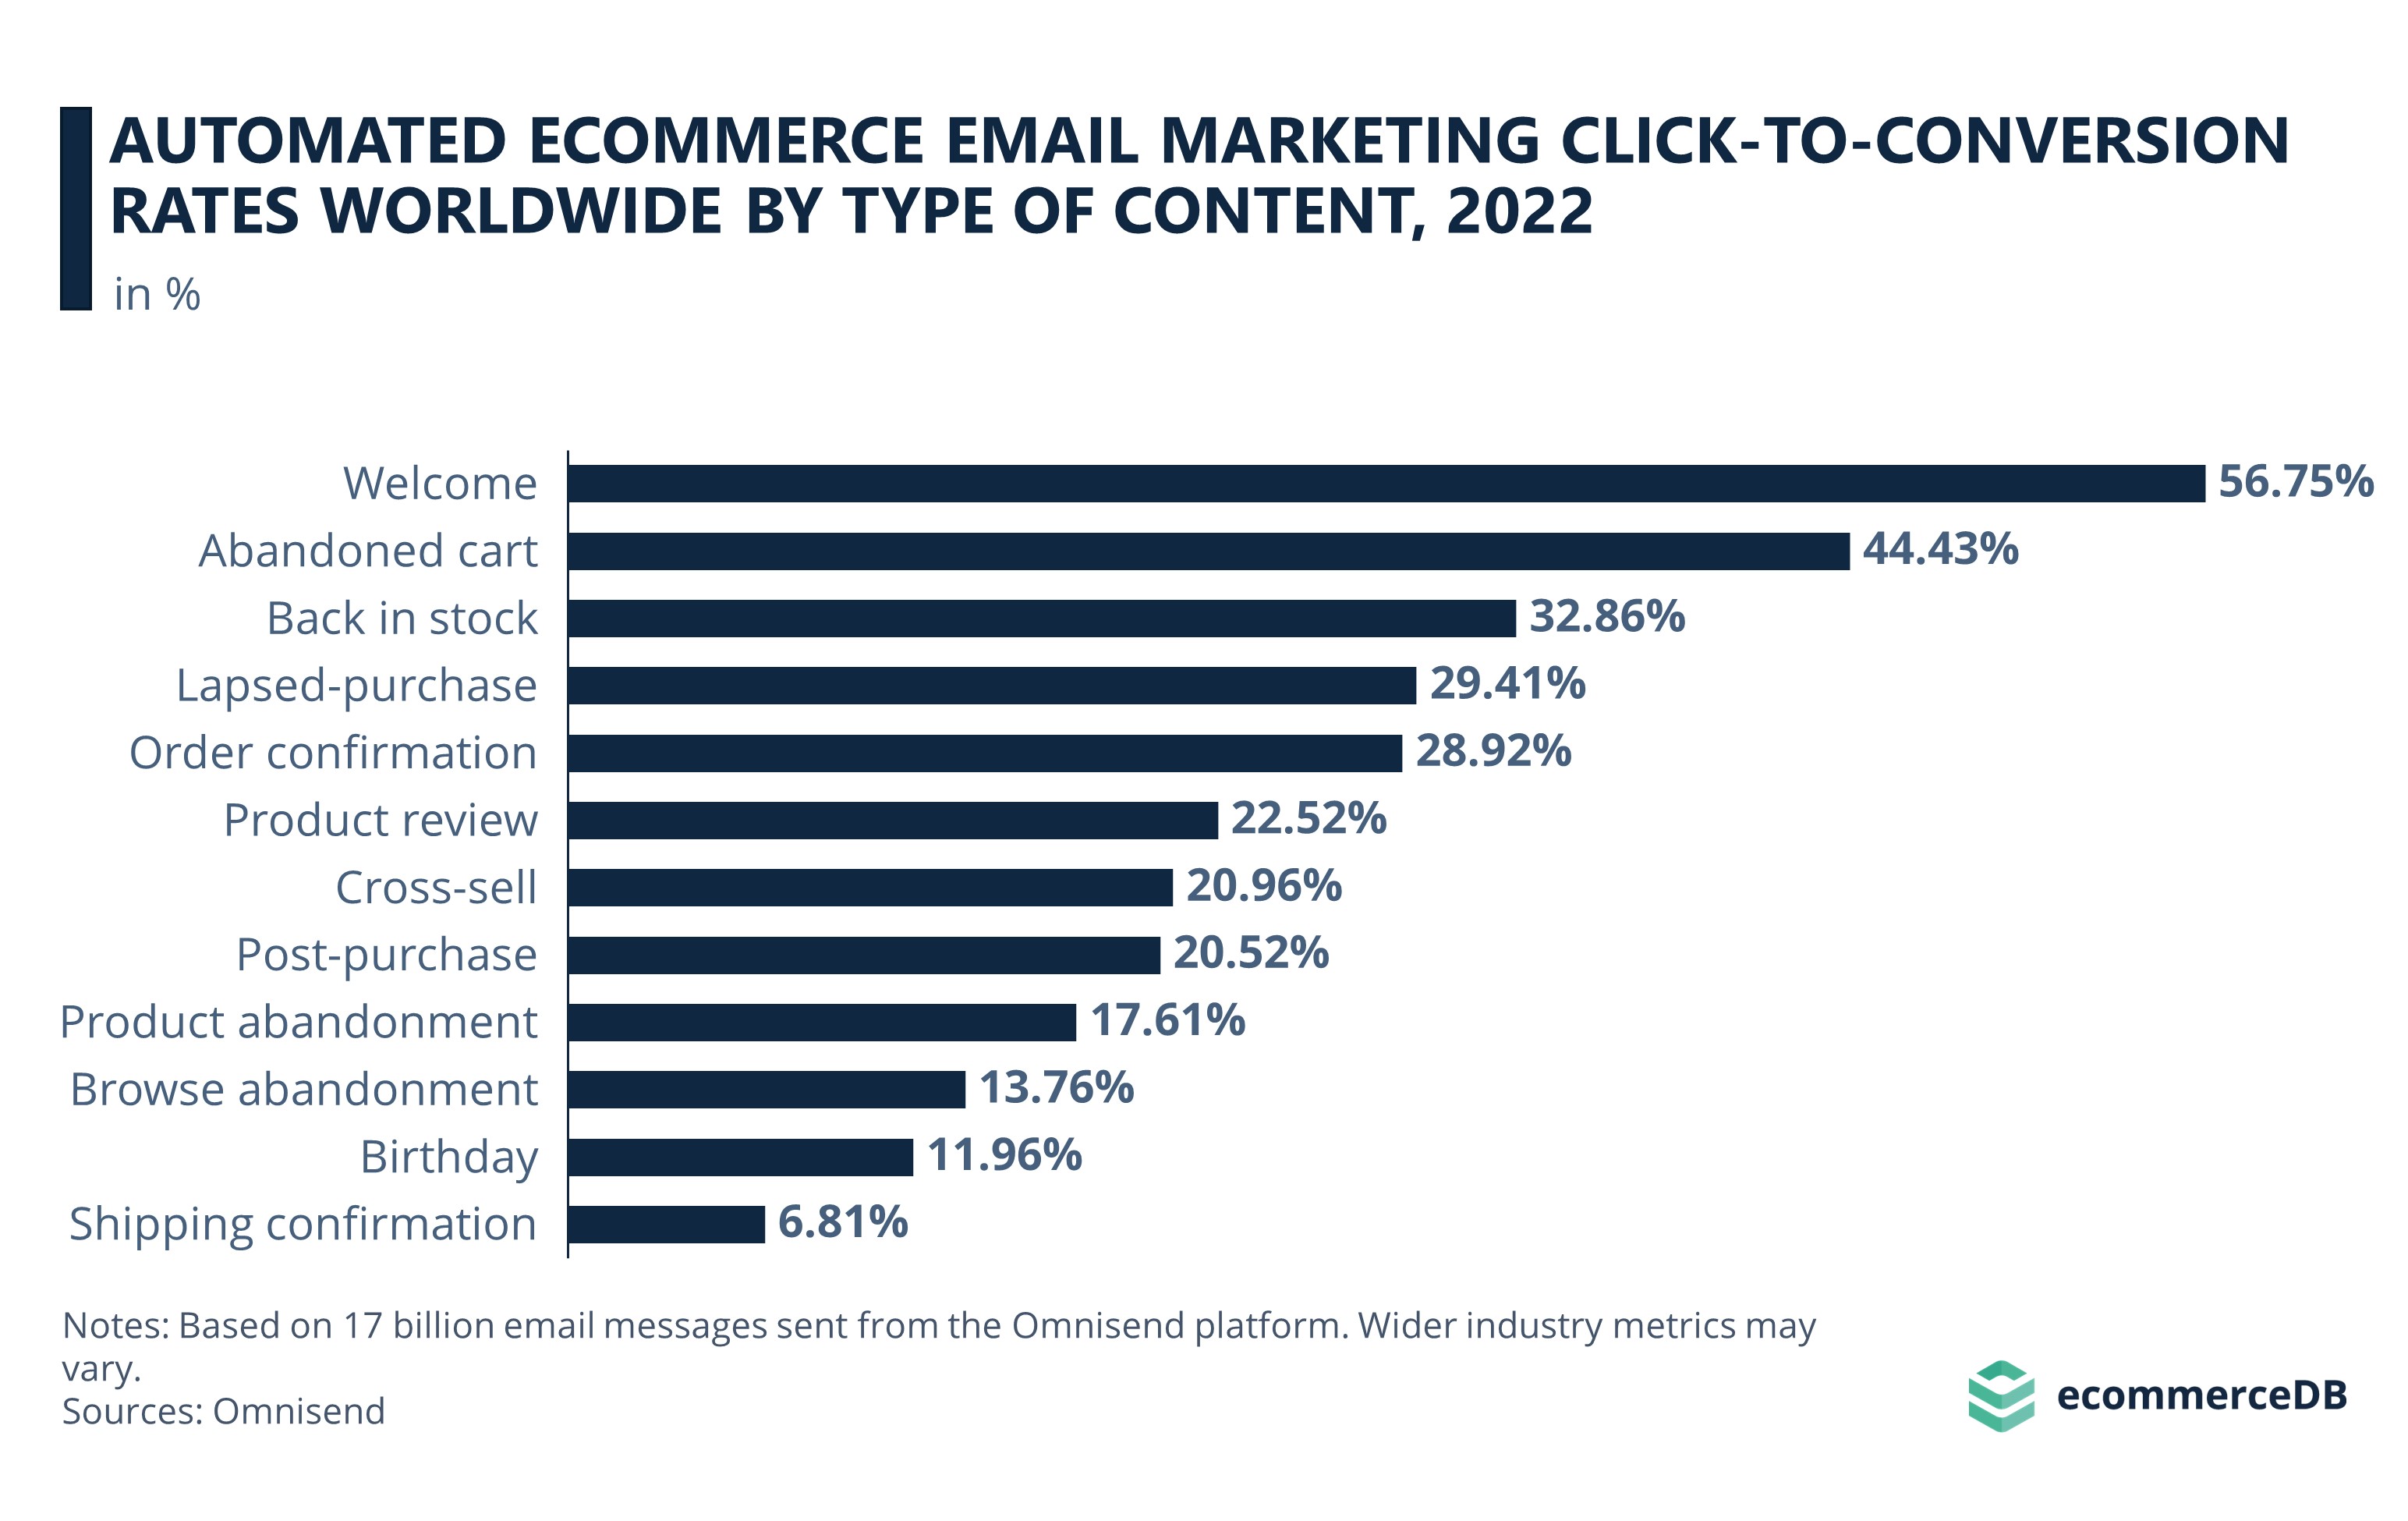 Automated eCommerce email marketing Click-to-Conversion rates worldwide by type of content, 2022